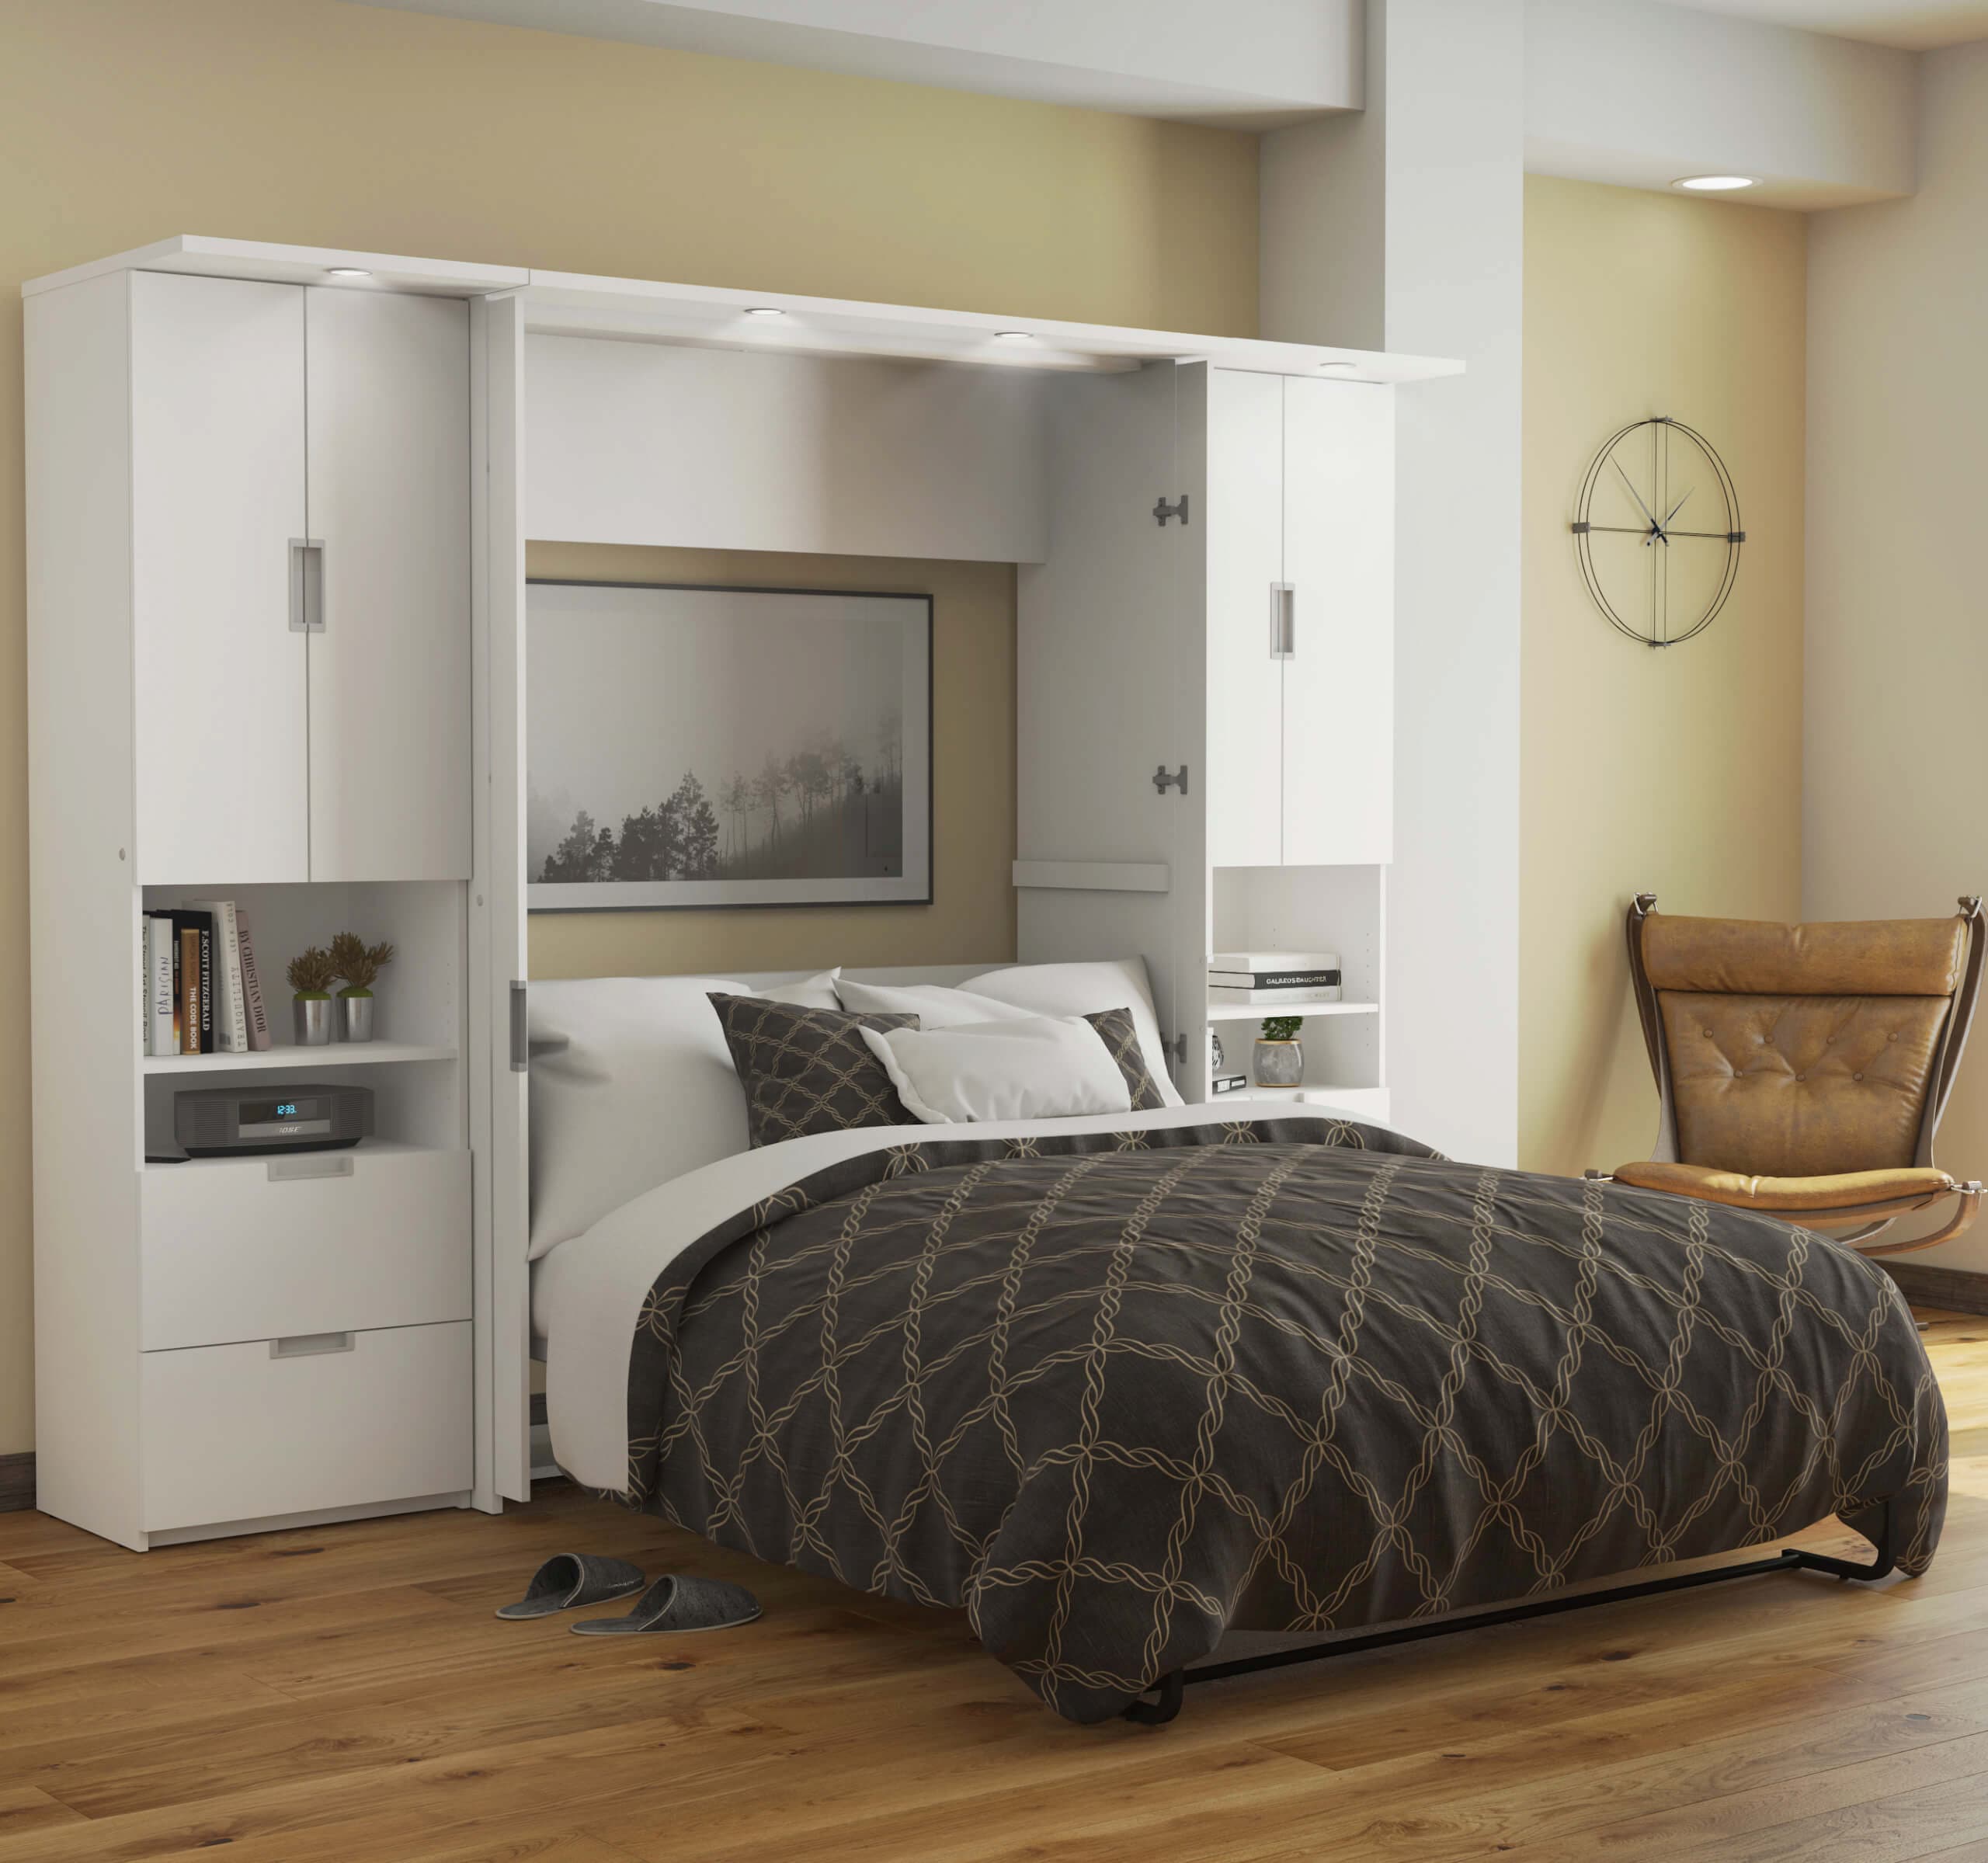 3 Reasons to Choose a Murphy Bed